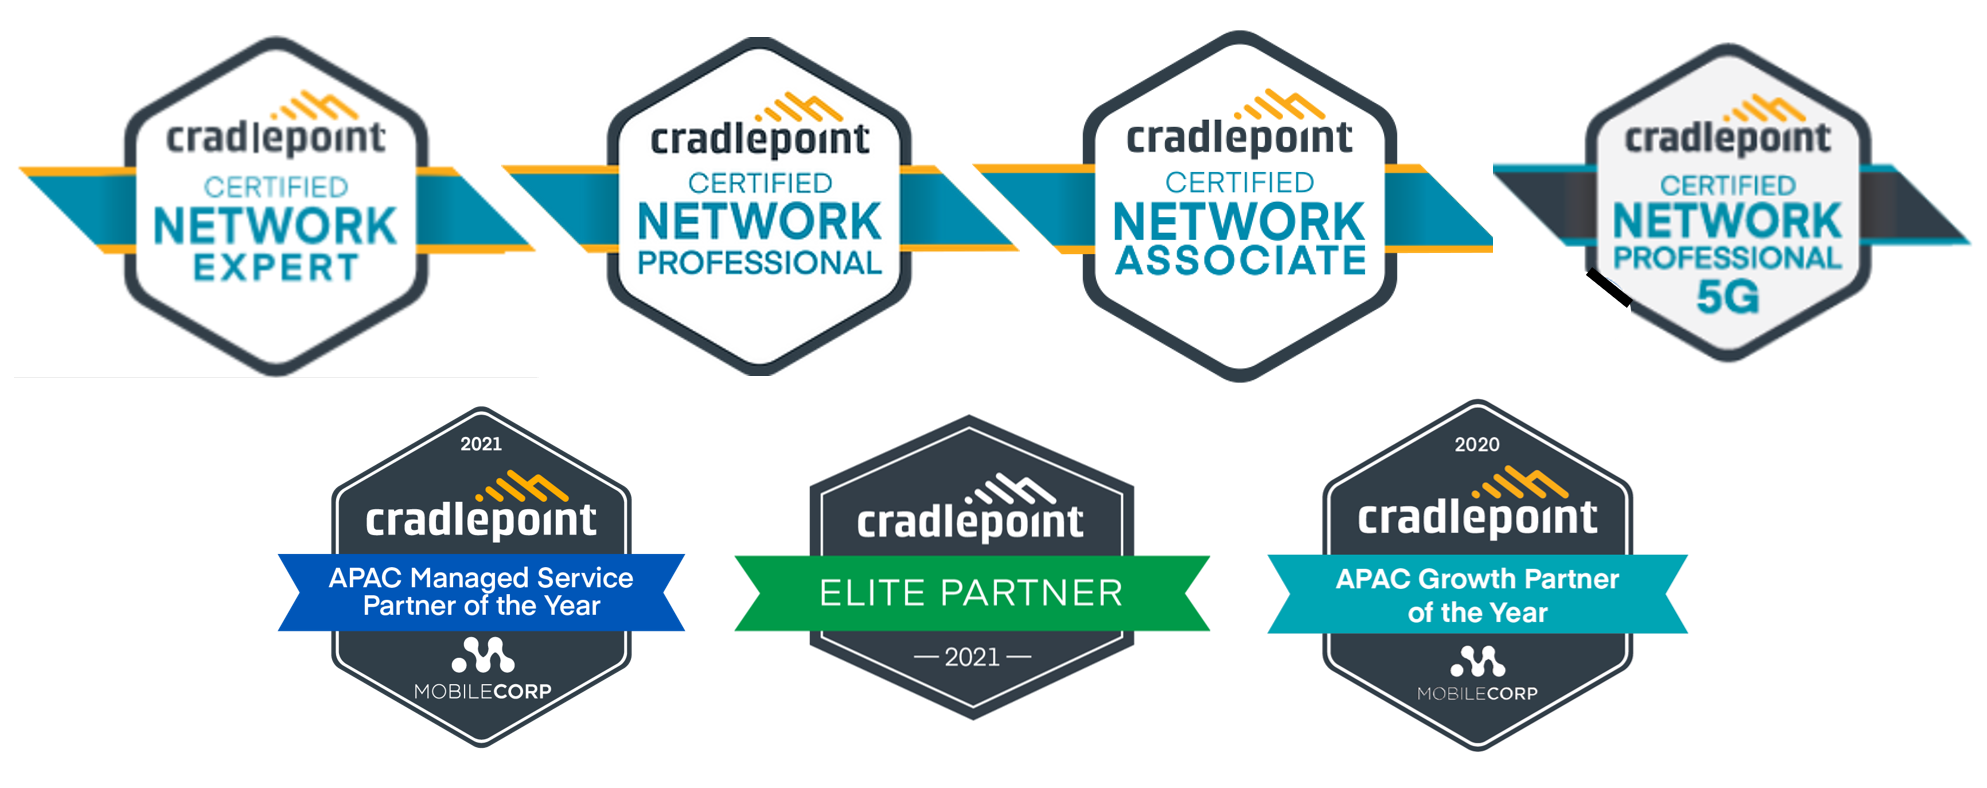 Cradlepoint Network certifications 2022